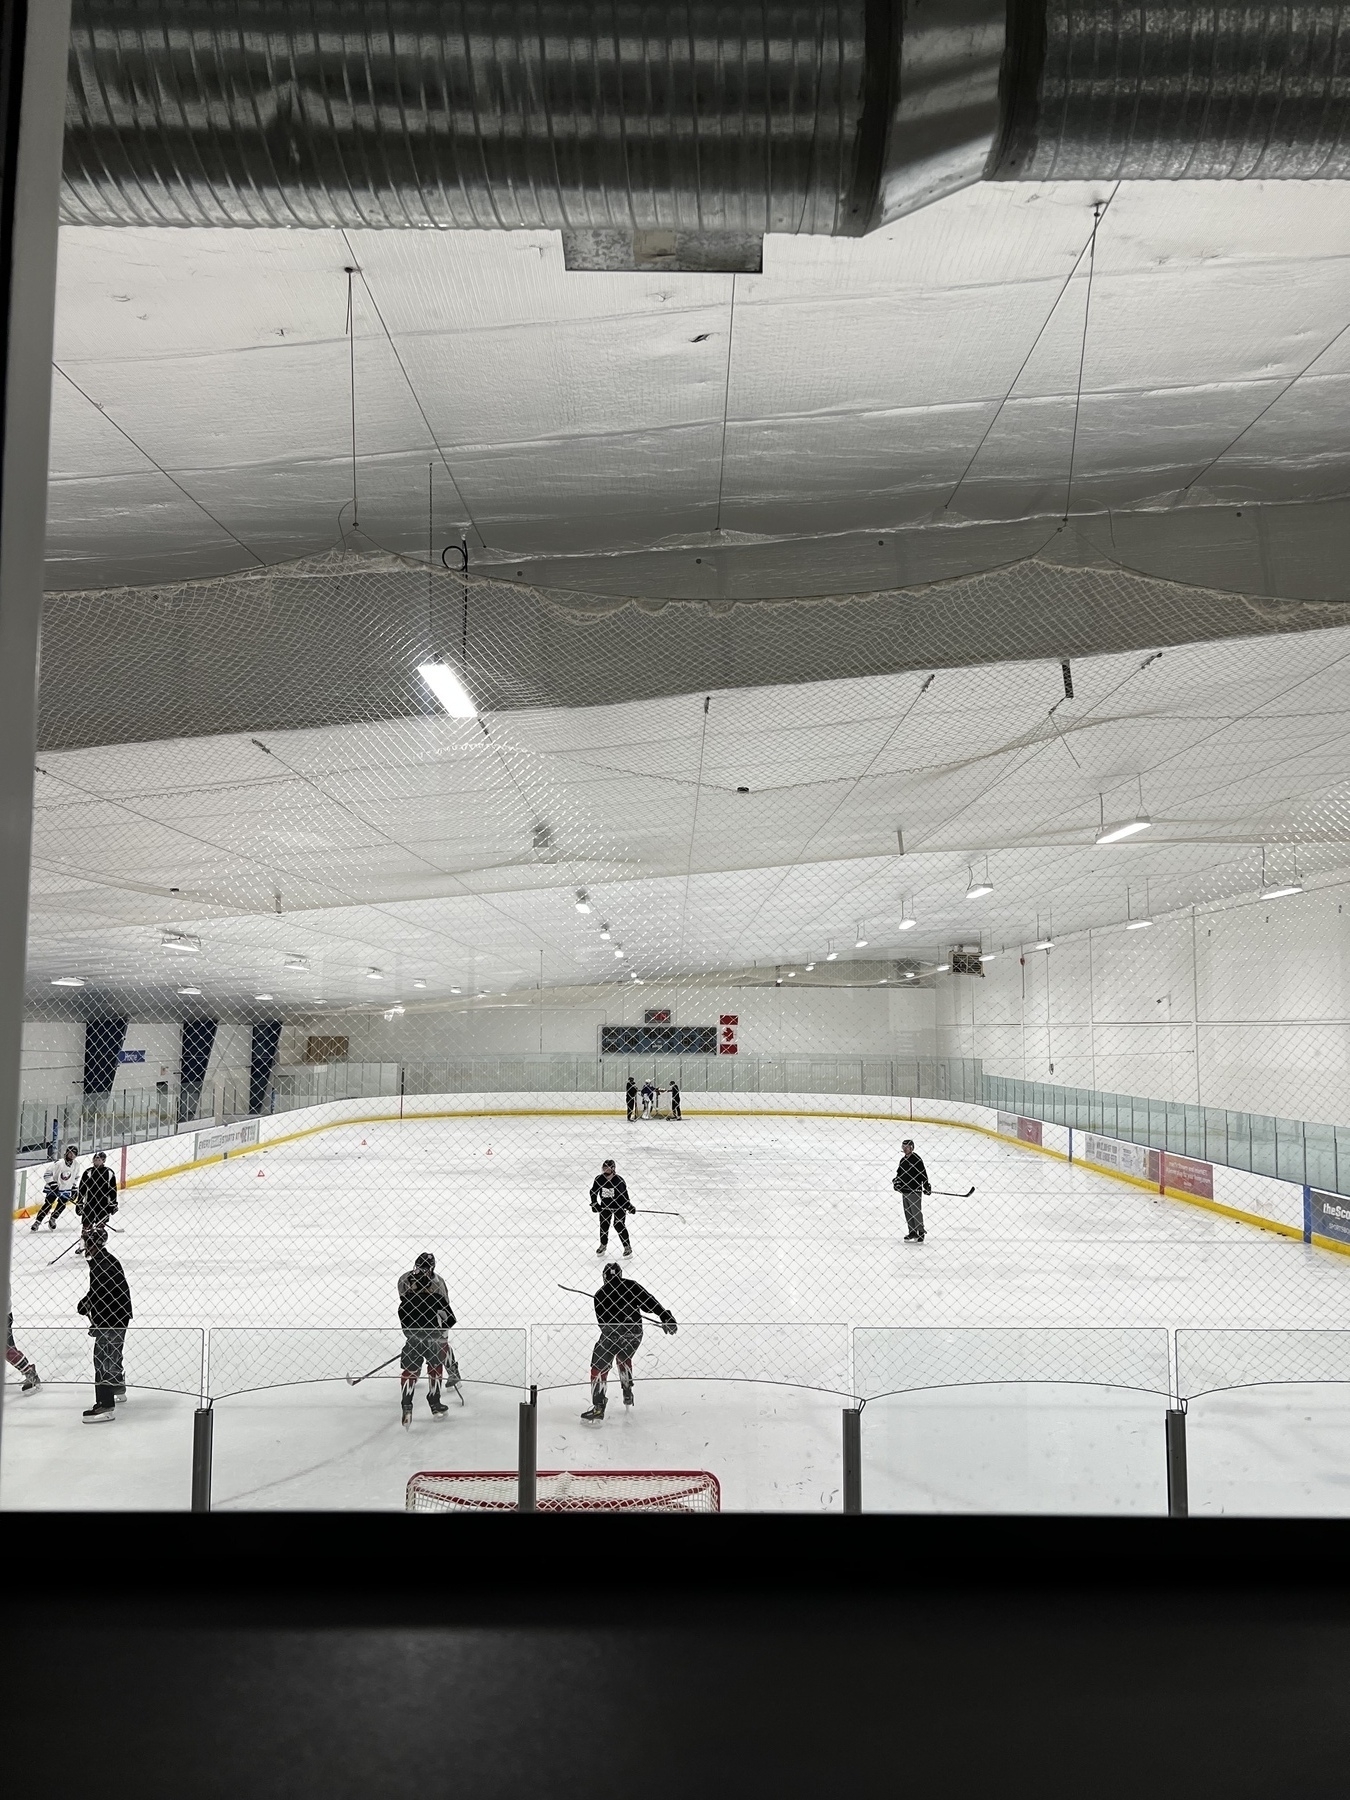 View of a hockey practice at an indoor rink. 